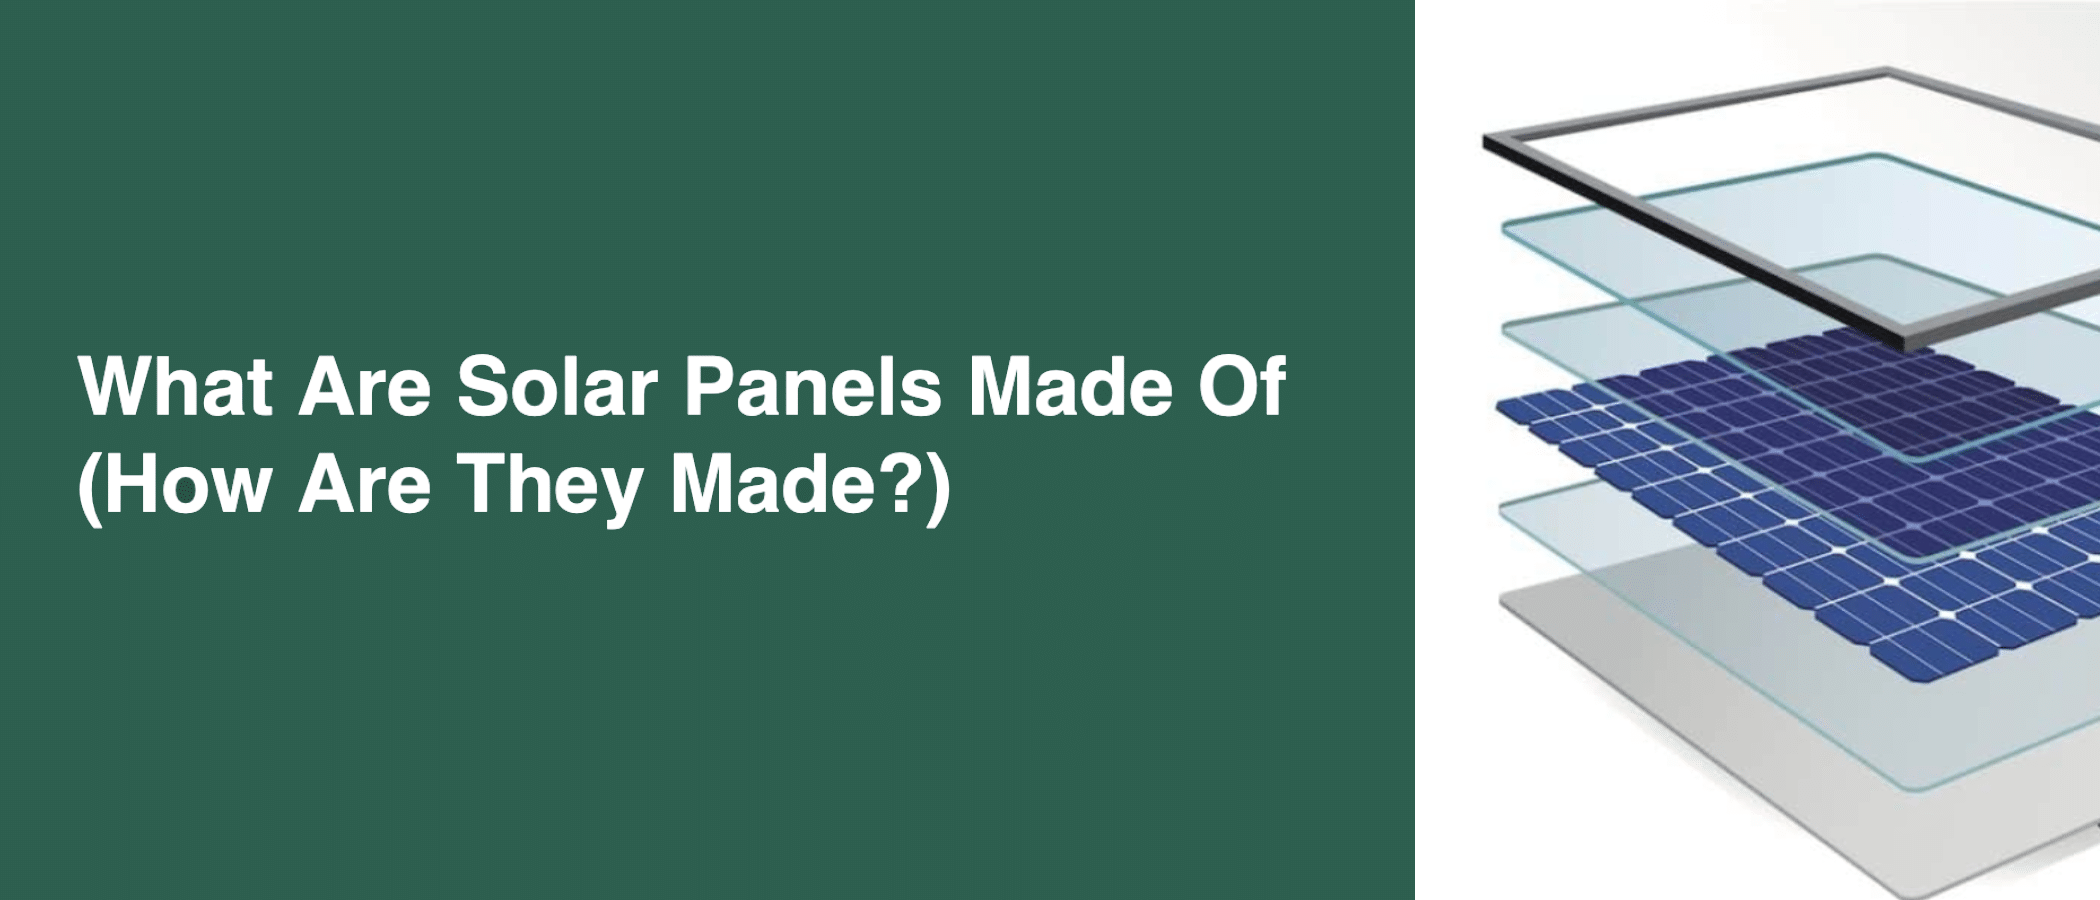 What Are Solar Panels Made of? How Are Solar Panels Made?